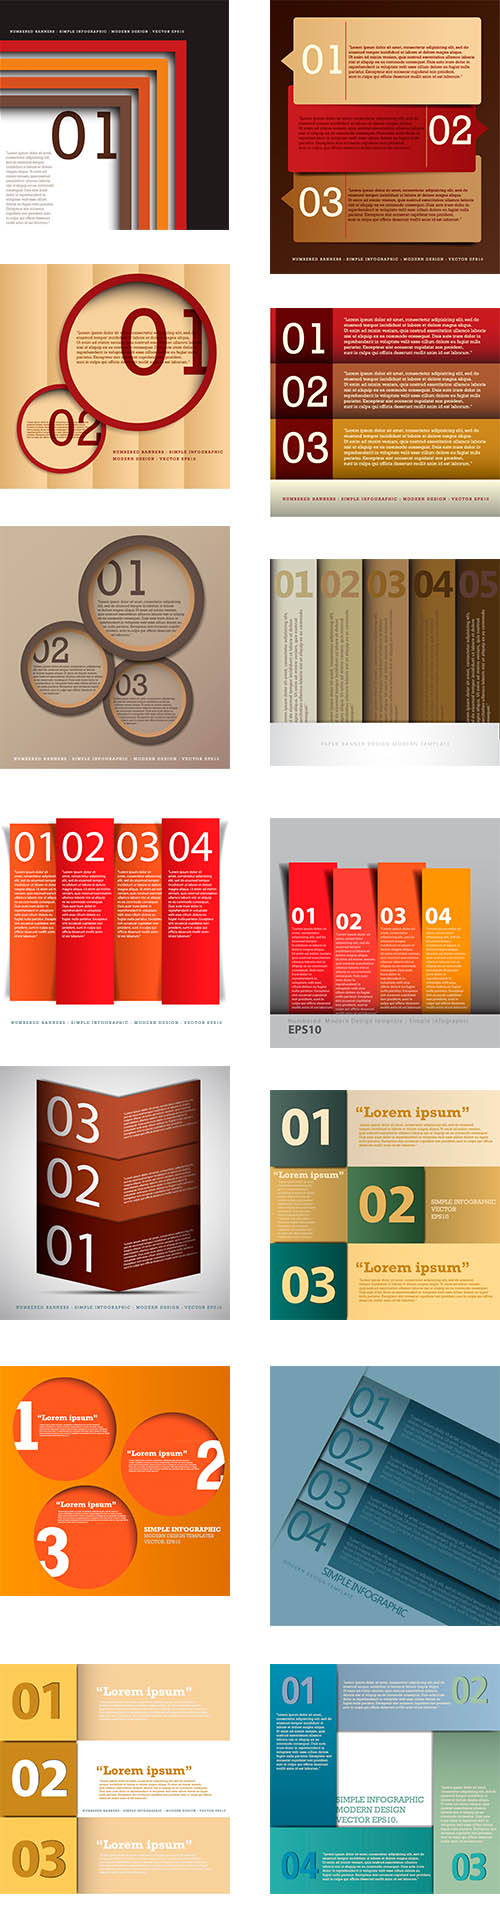 Infographic banners with numbers 0496